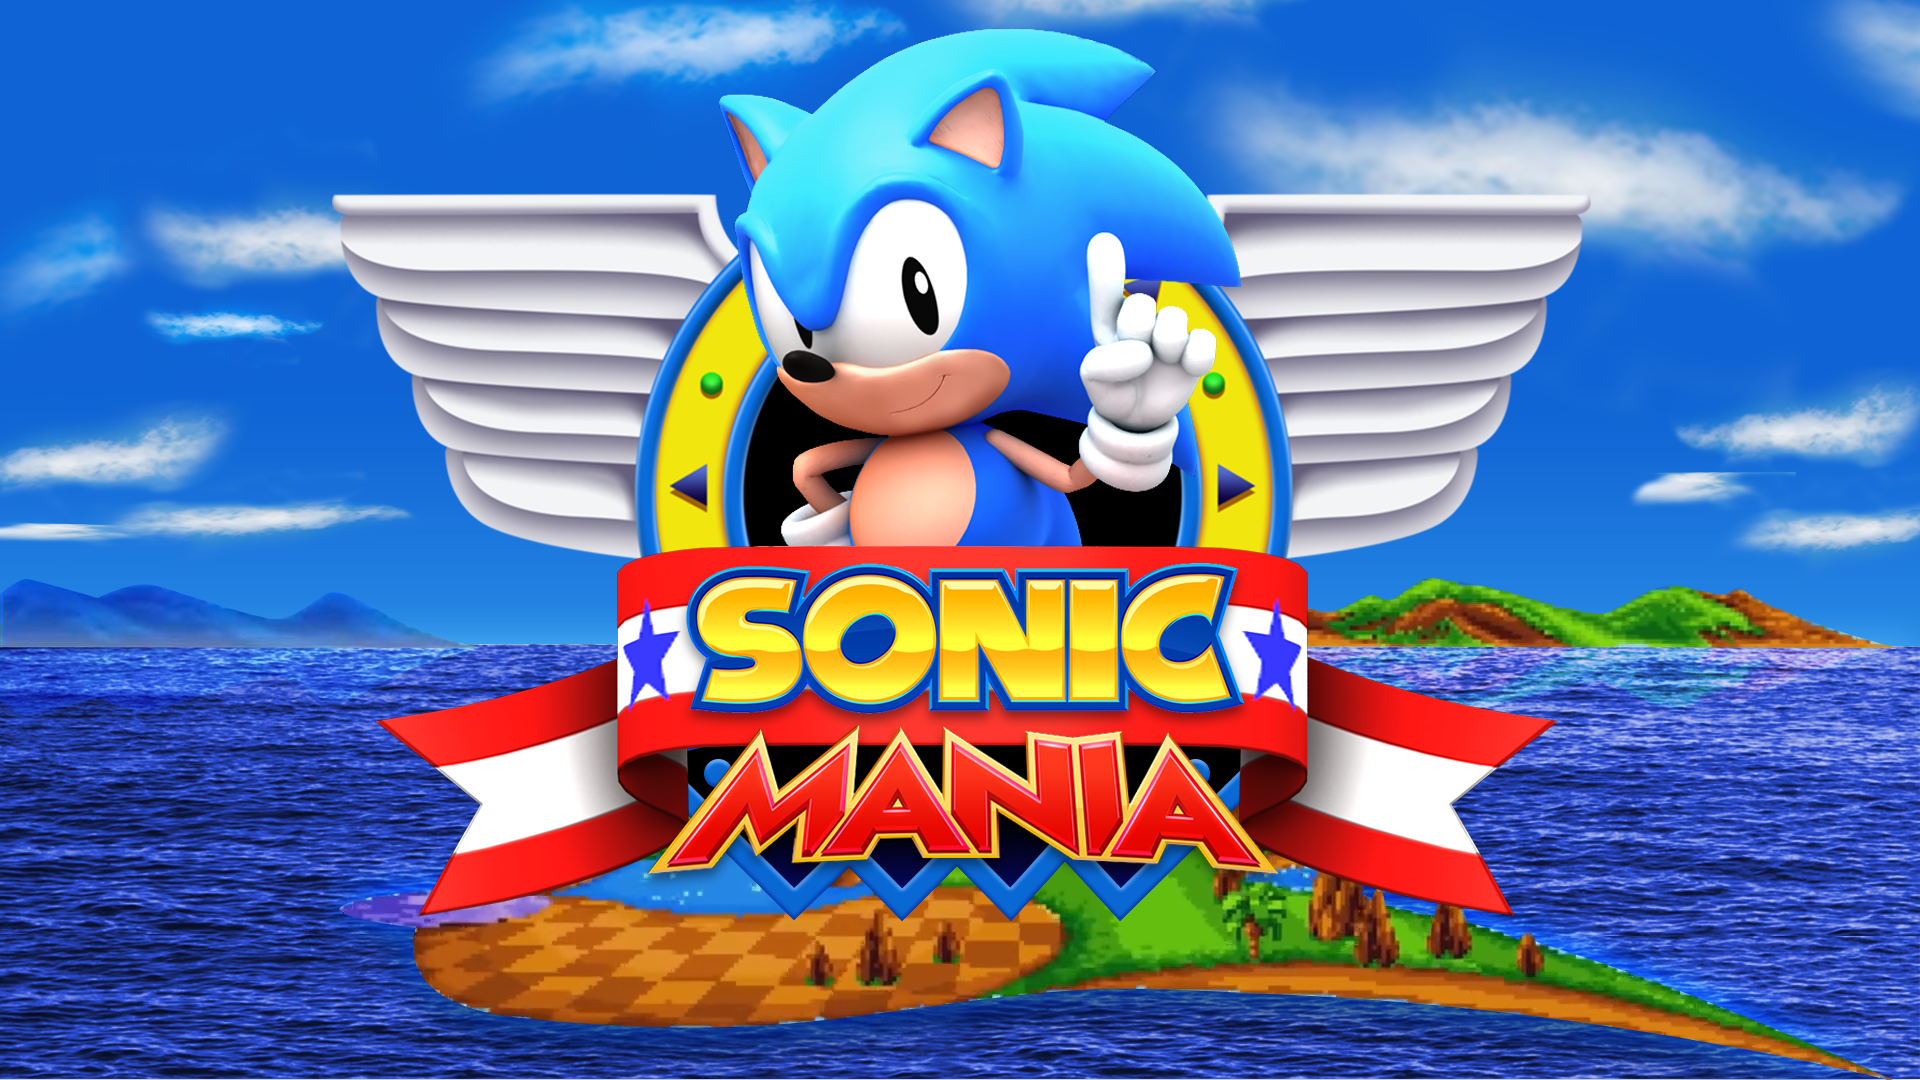 Sonic Mania Plus - First Press Edition [PS4] 